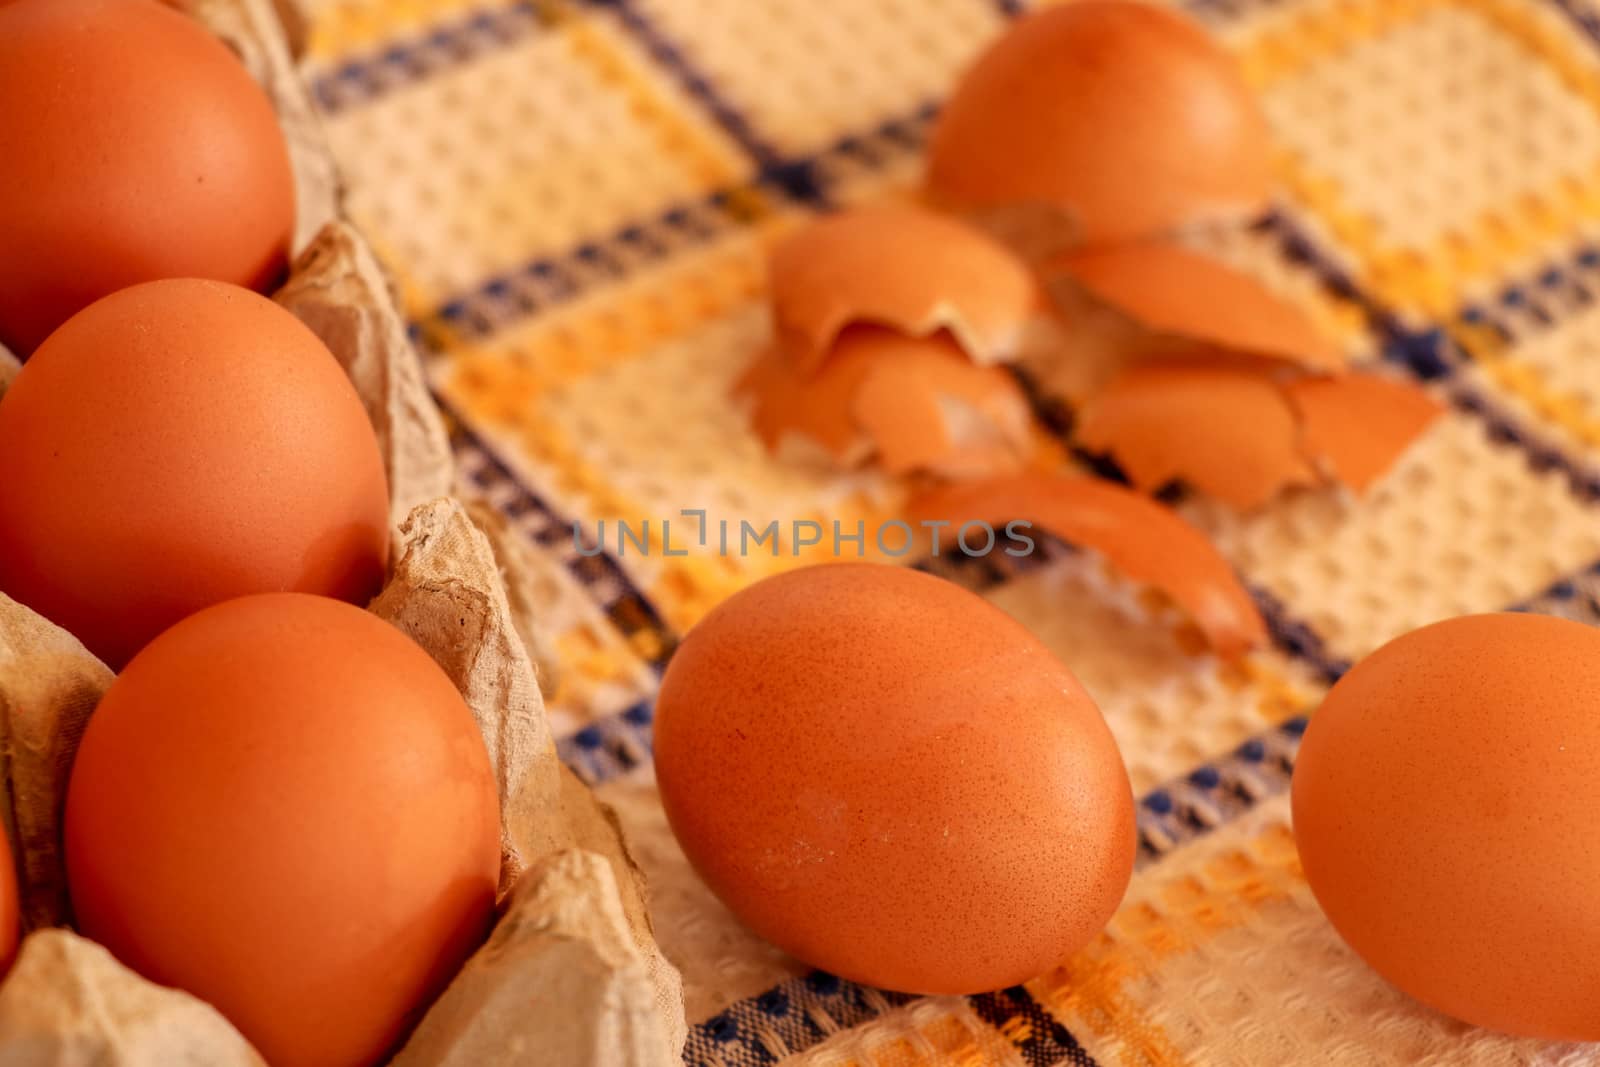 Brown chicken egg on vintage tablecloth and eggs in the basket.